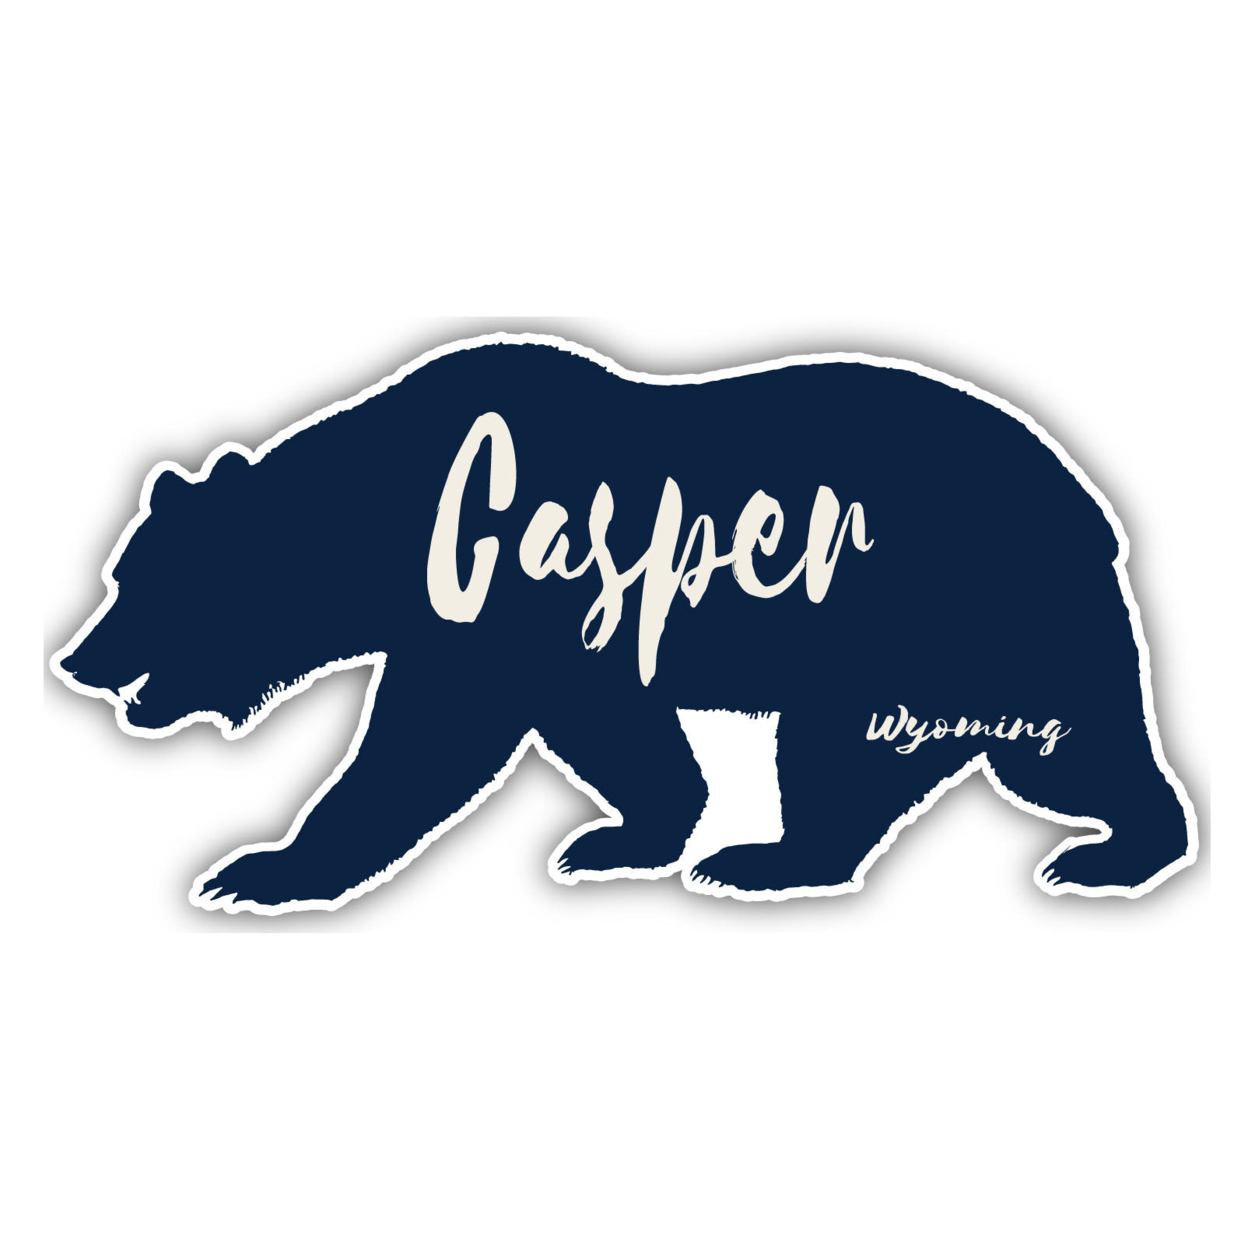 Casper Wyoming Souvenir Decorative Stickers (Choose Theme And Size) - 4-Pack, 2-Inch, Camp Life